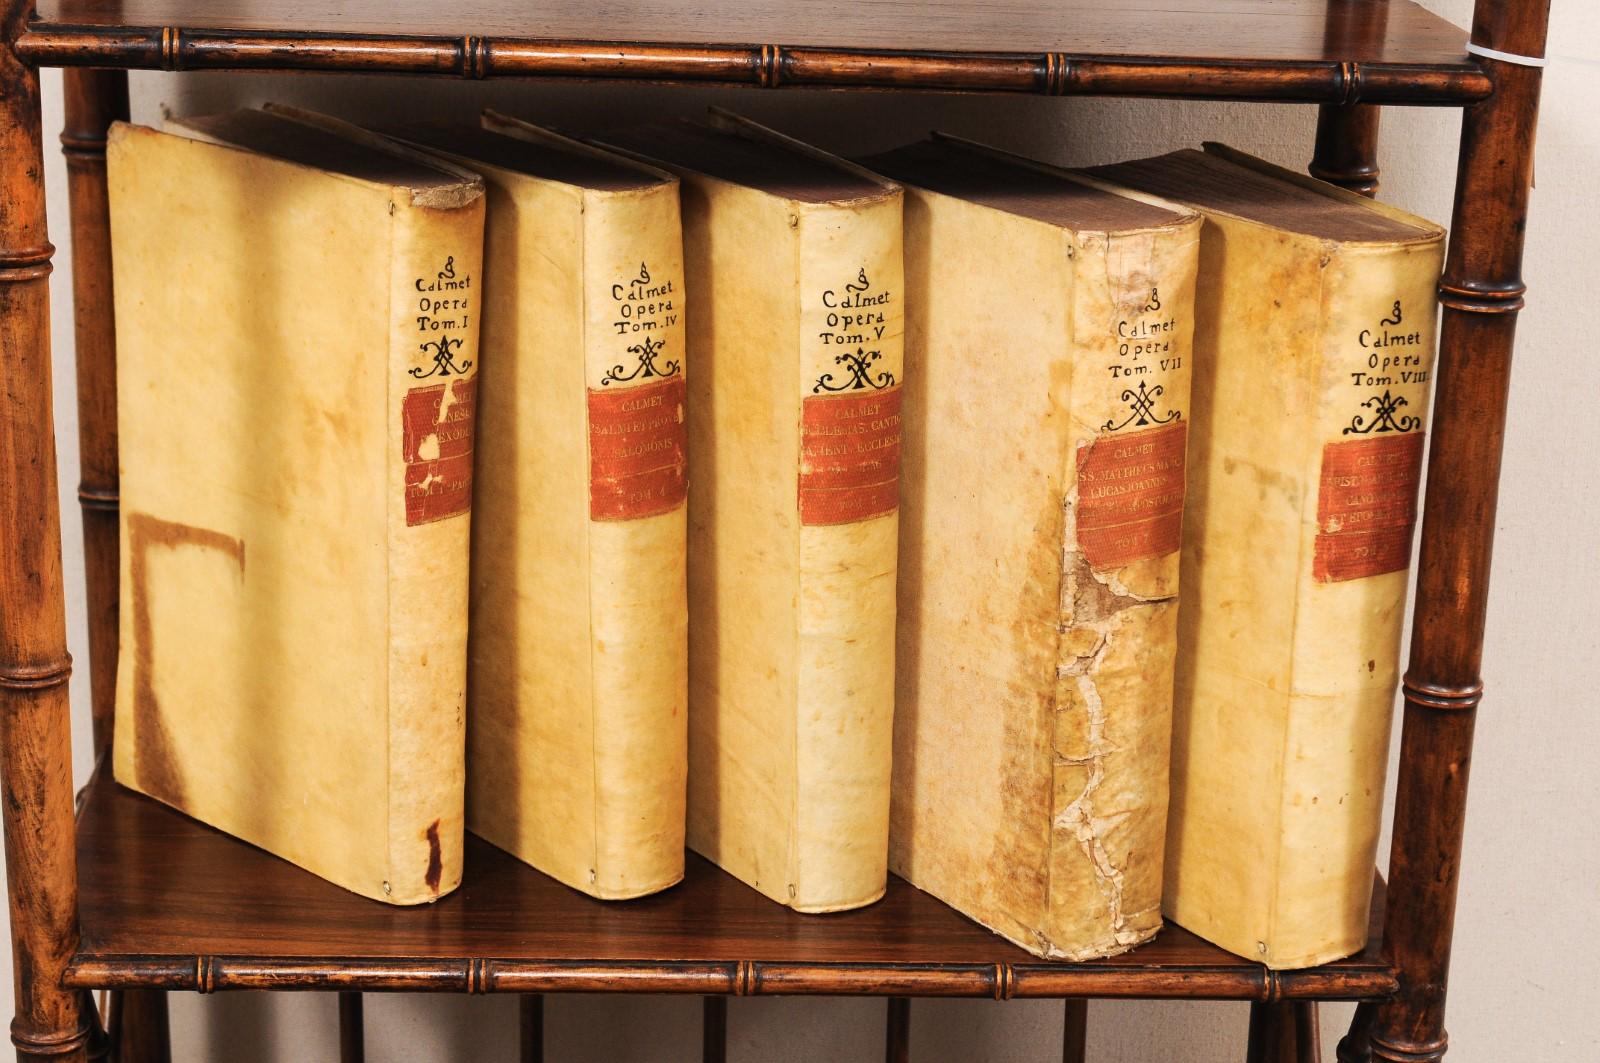 A handsome collection of 5 Italian 18th century vellum bound books. This set of religious books from Italy, which retain their original vellum bindings, are dated from 1734 to 1735. The books seated side-by-side measure as an approximate 13